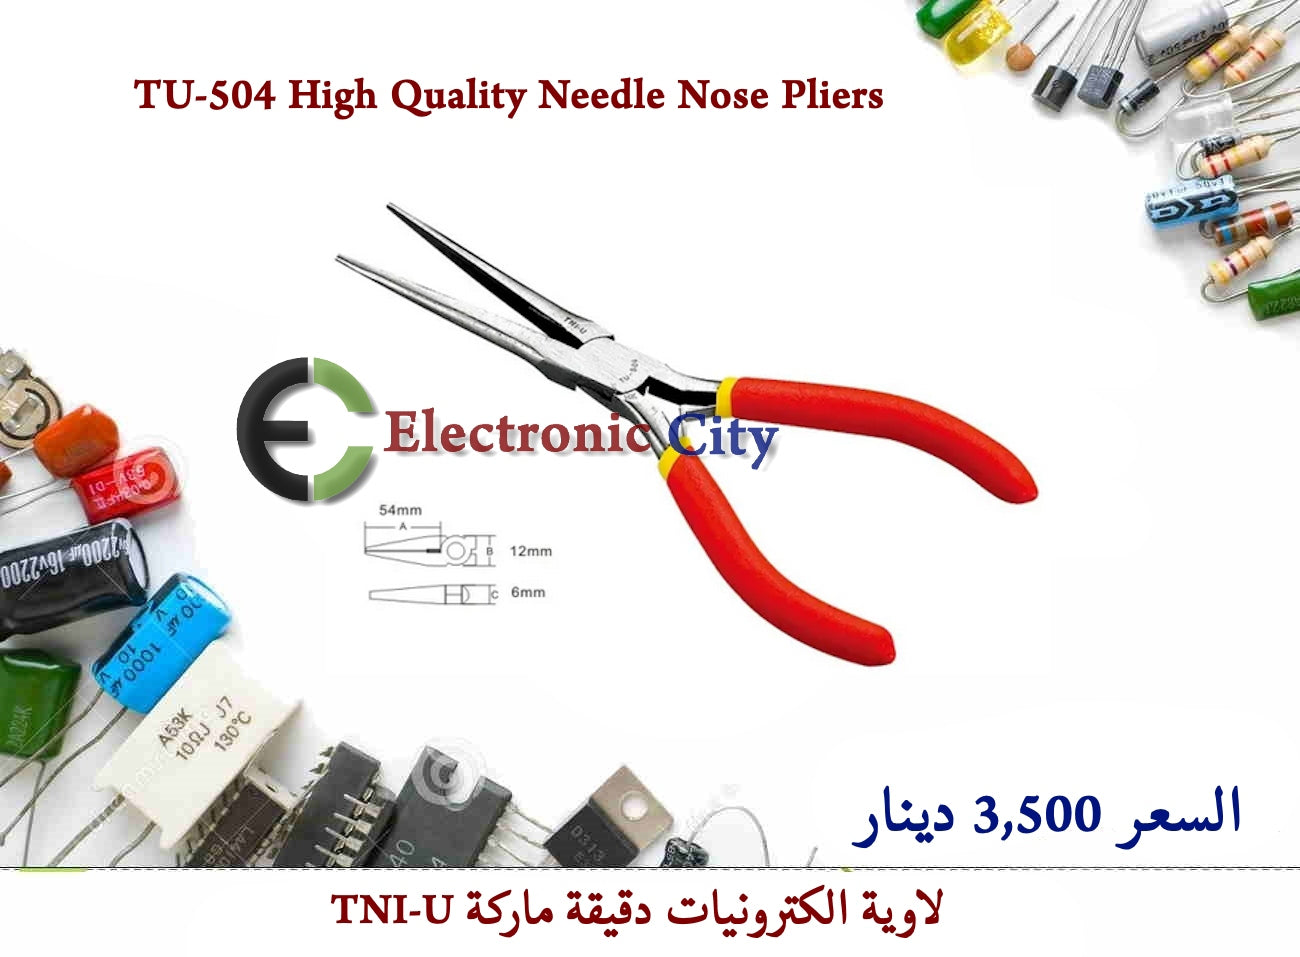 TU-504 High Quality Needle Nose Pliers